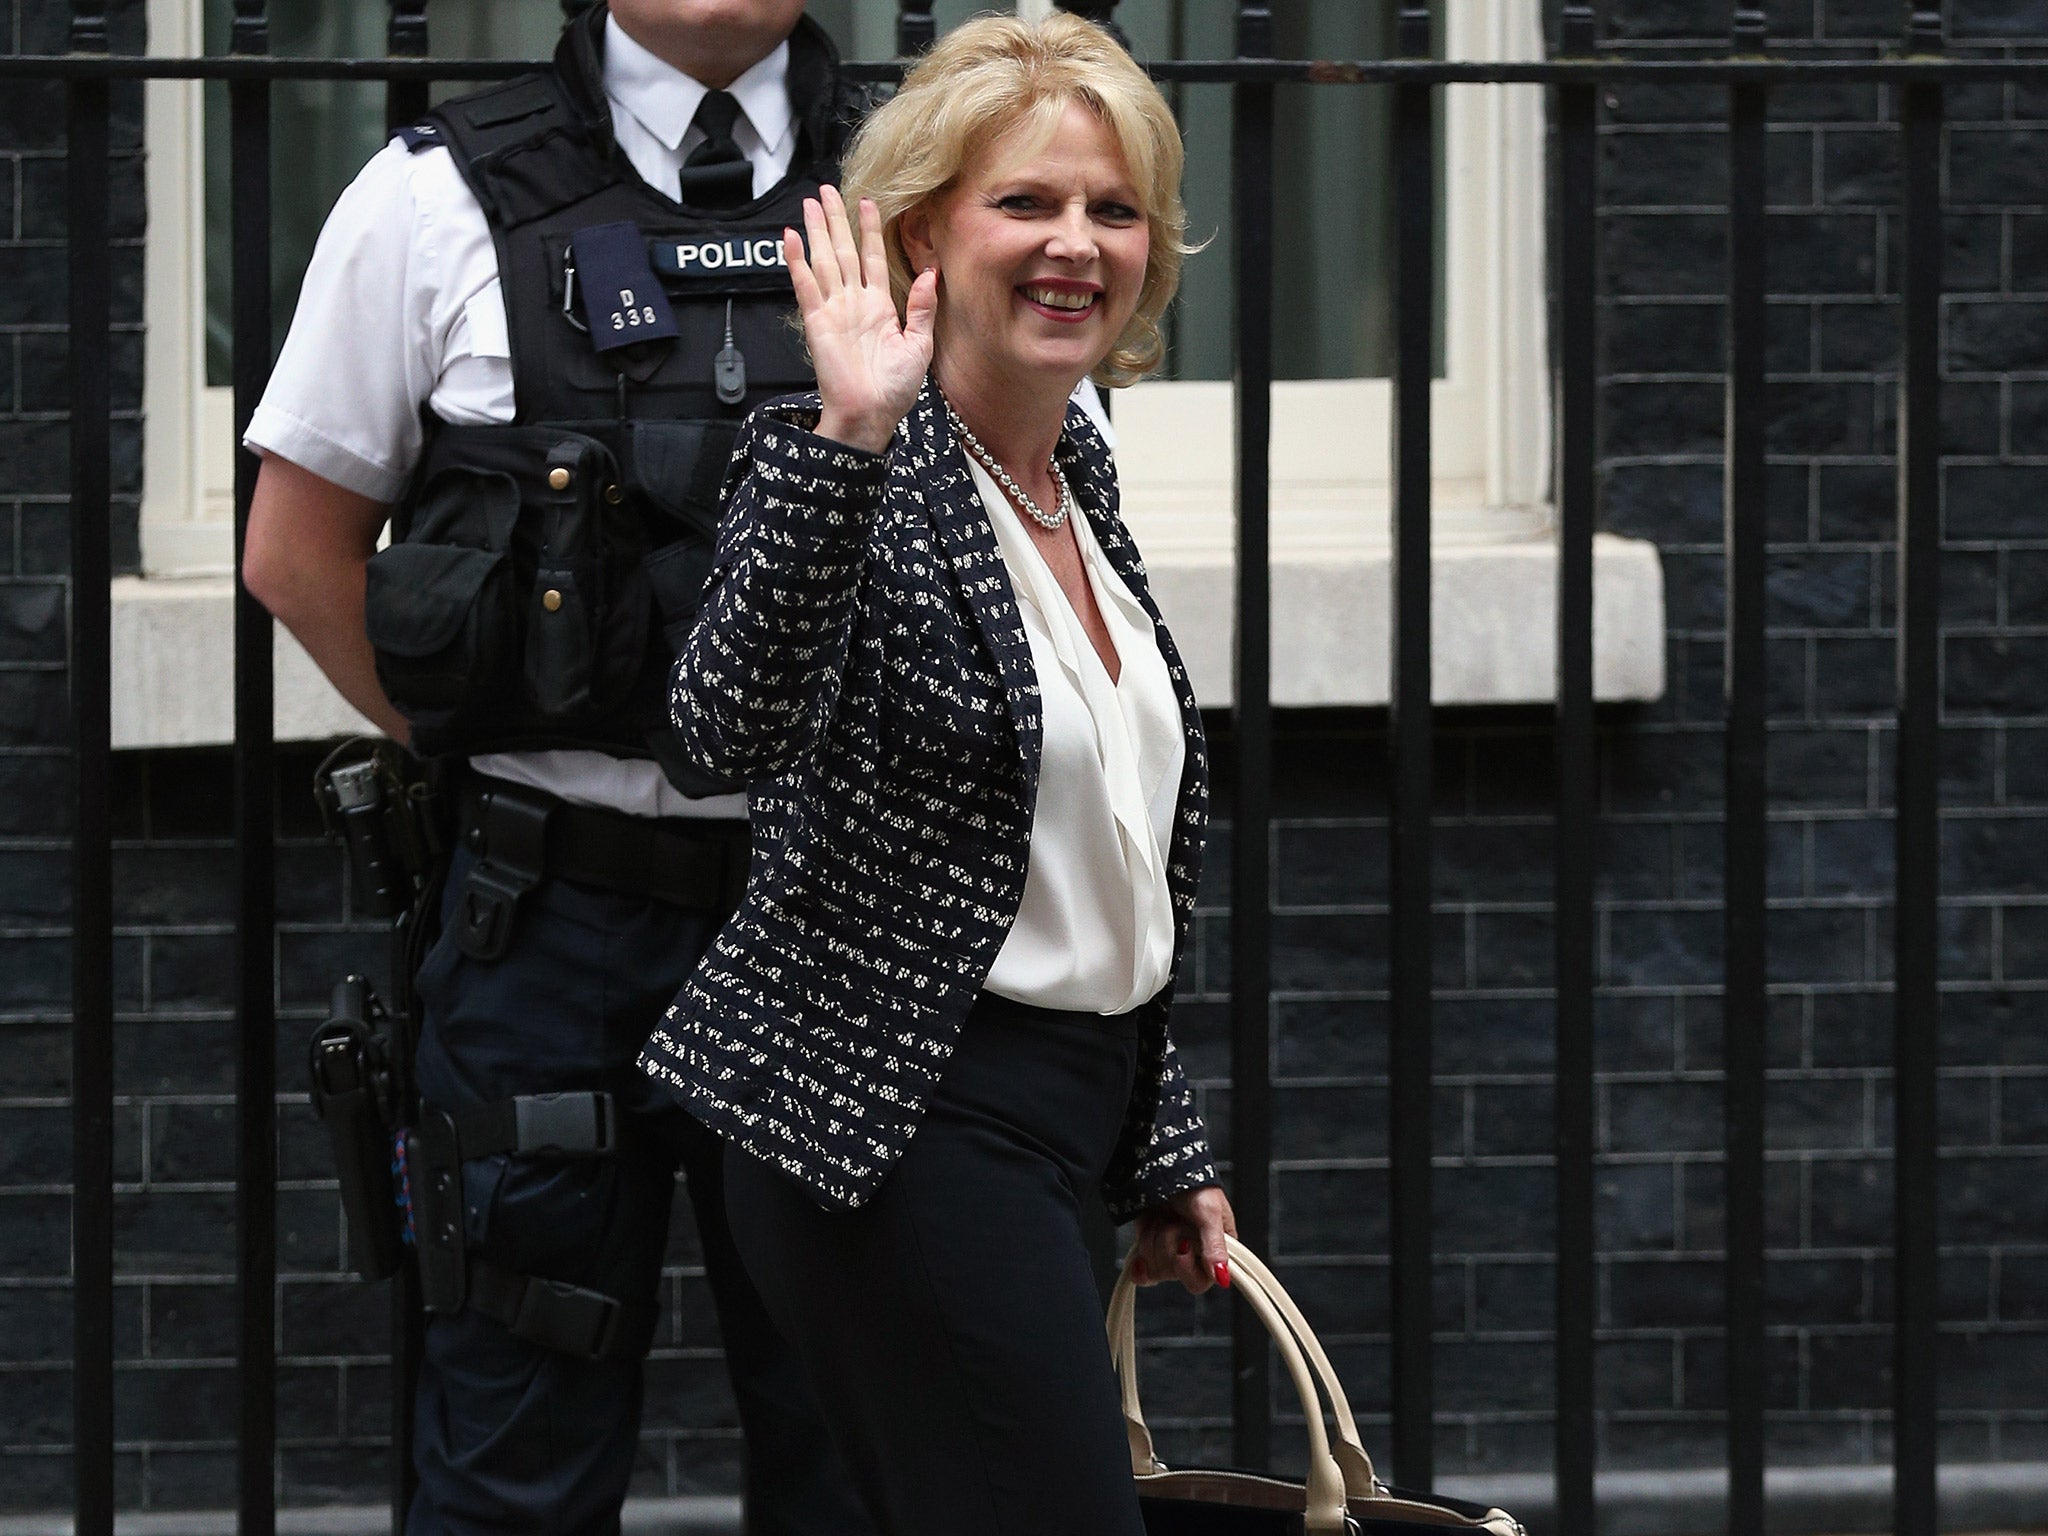 Anna Soubry, Minister for Welfare, Personnel and Veterans at the Ministry of Defence